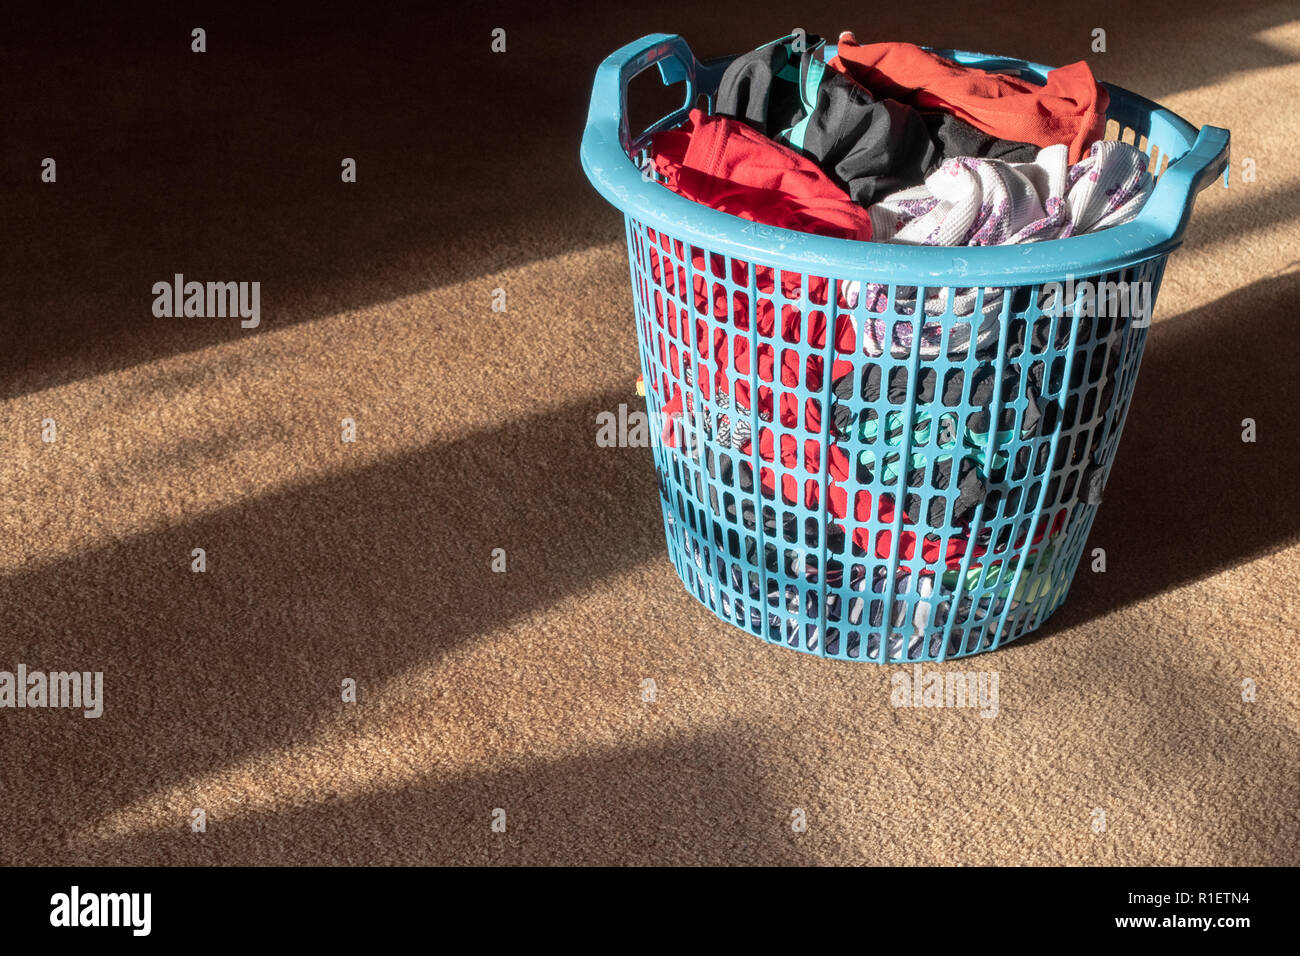 Freshly laundered clothing items inside a blue plastic clothes basket standing in the sunlight on a brown carpet Stock Photo